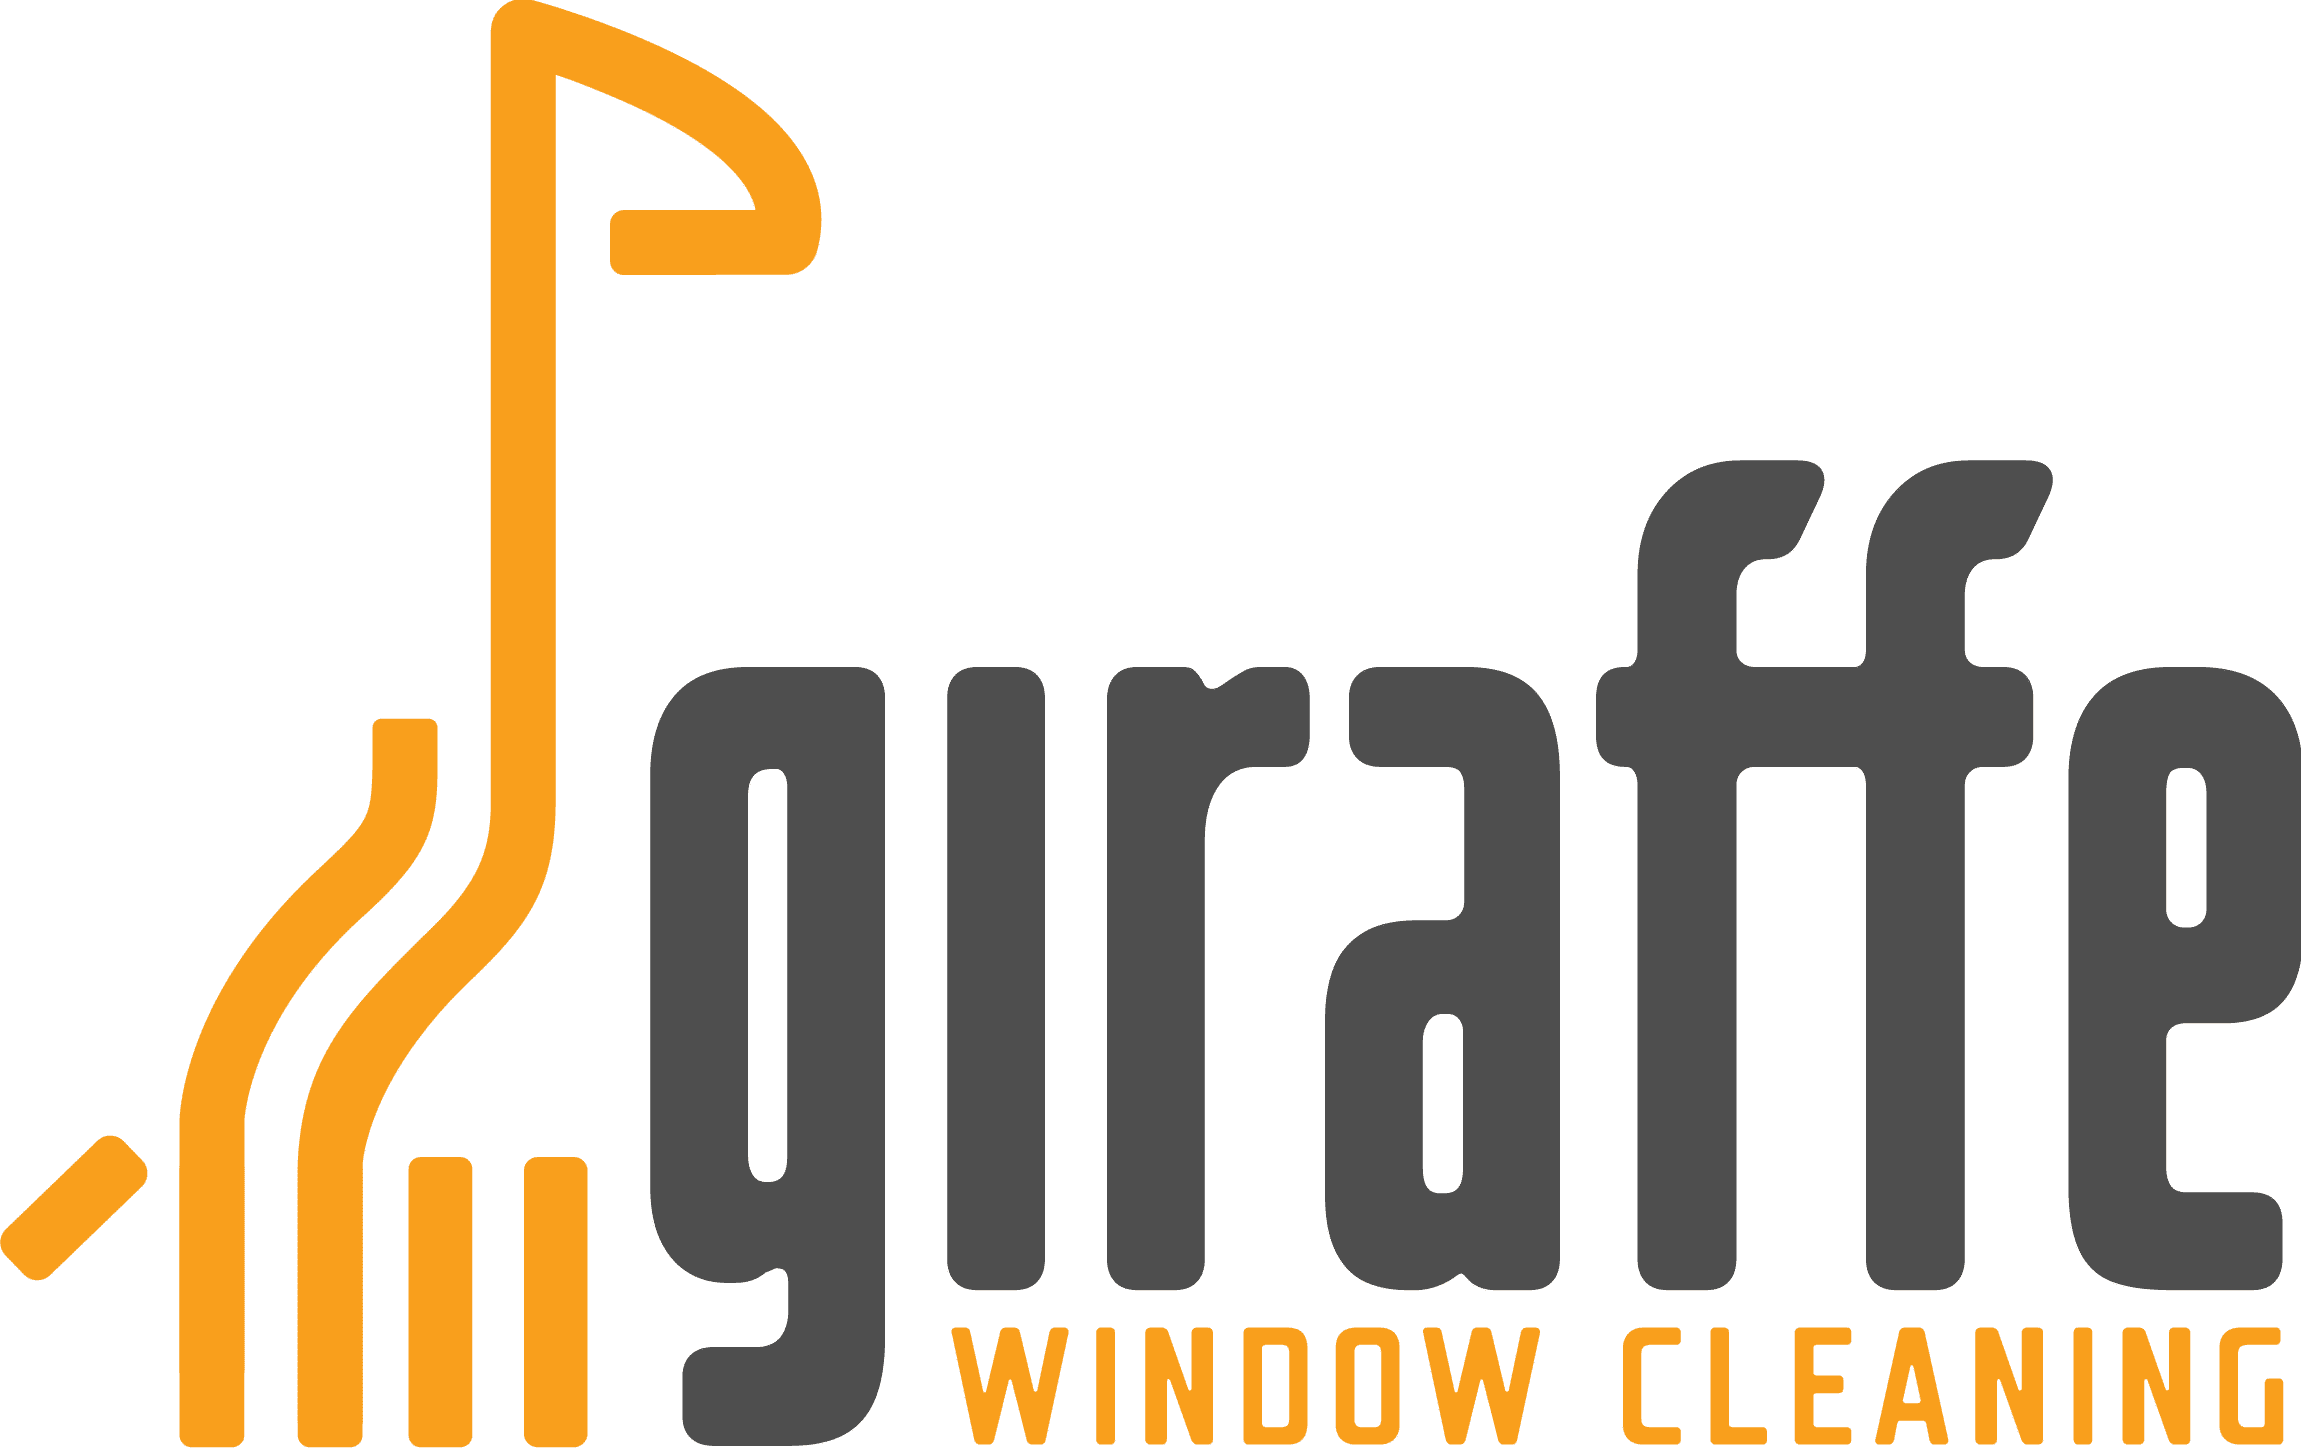 Do Magnetic Window Cleaners Work?